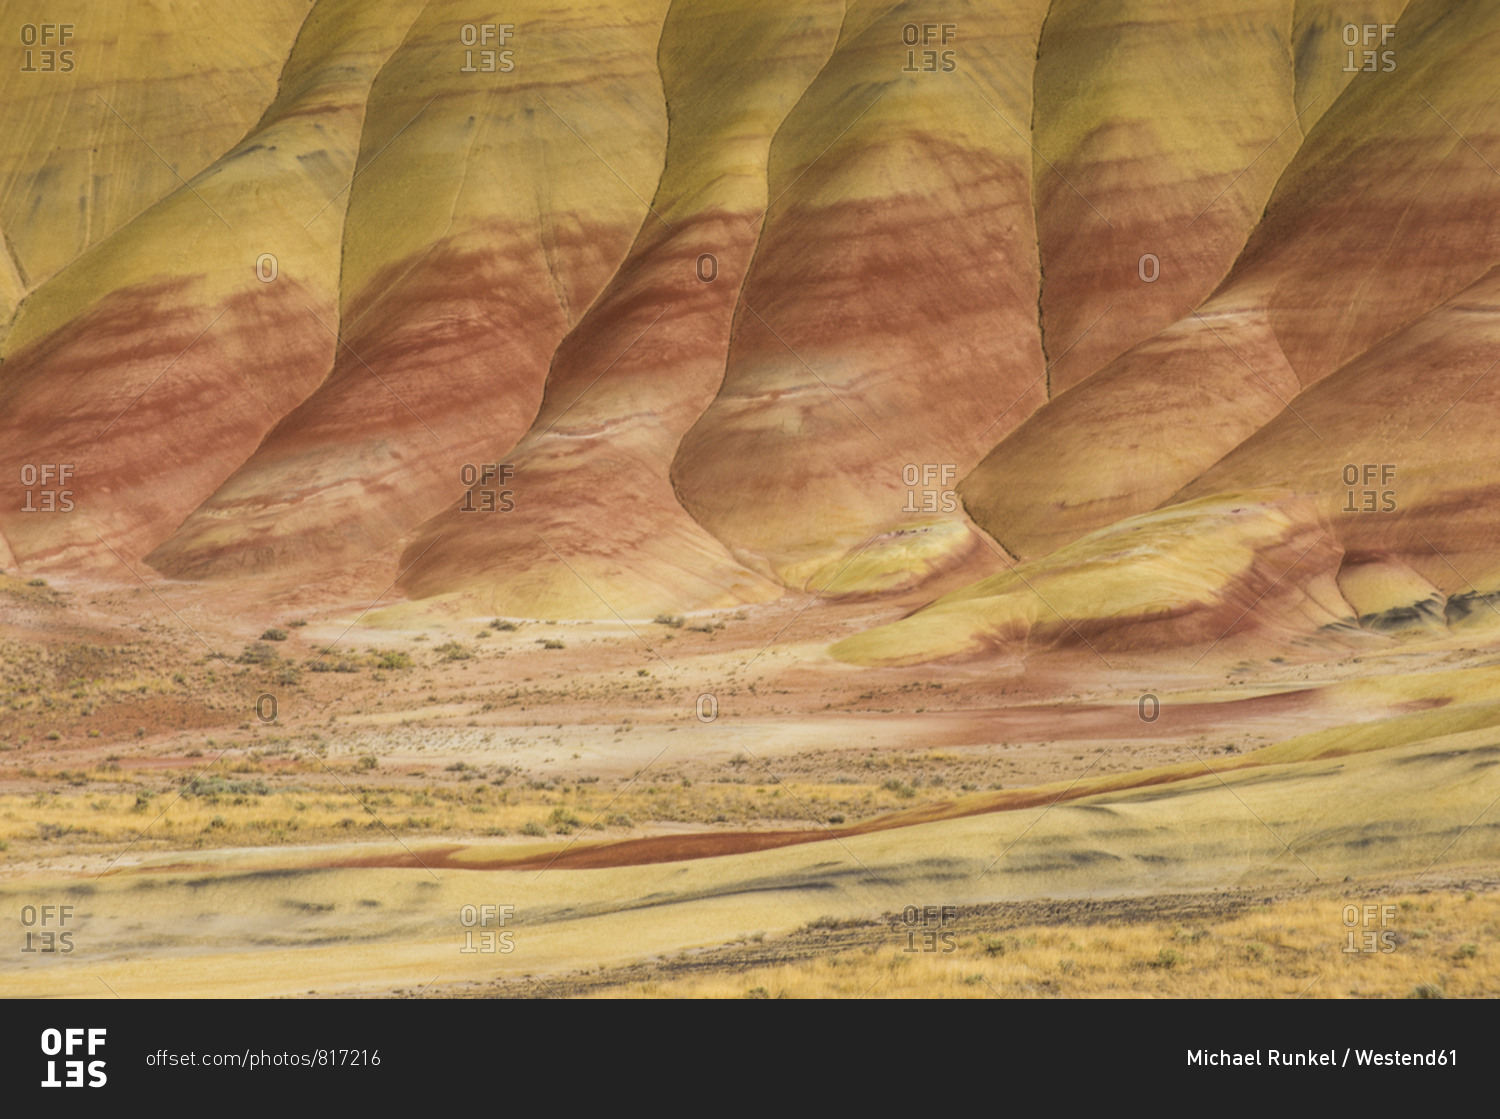 USA- Oregon- John Day Fossil Beds National Monument- Painted hills